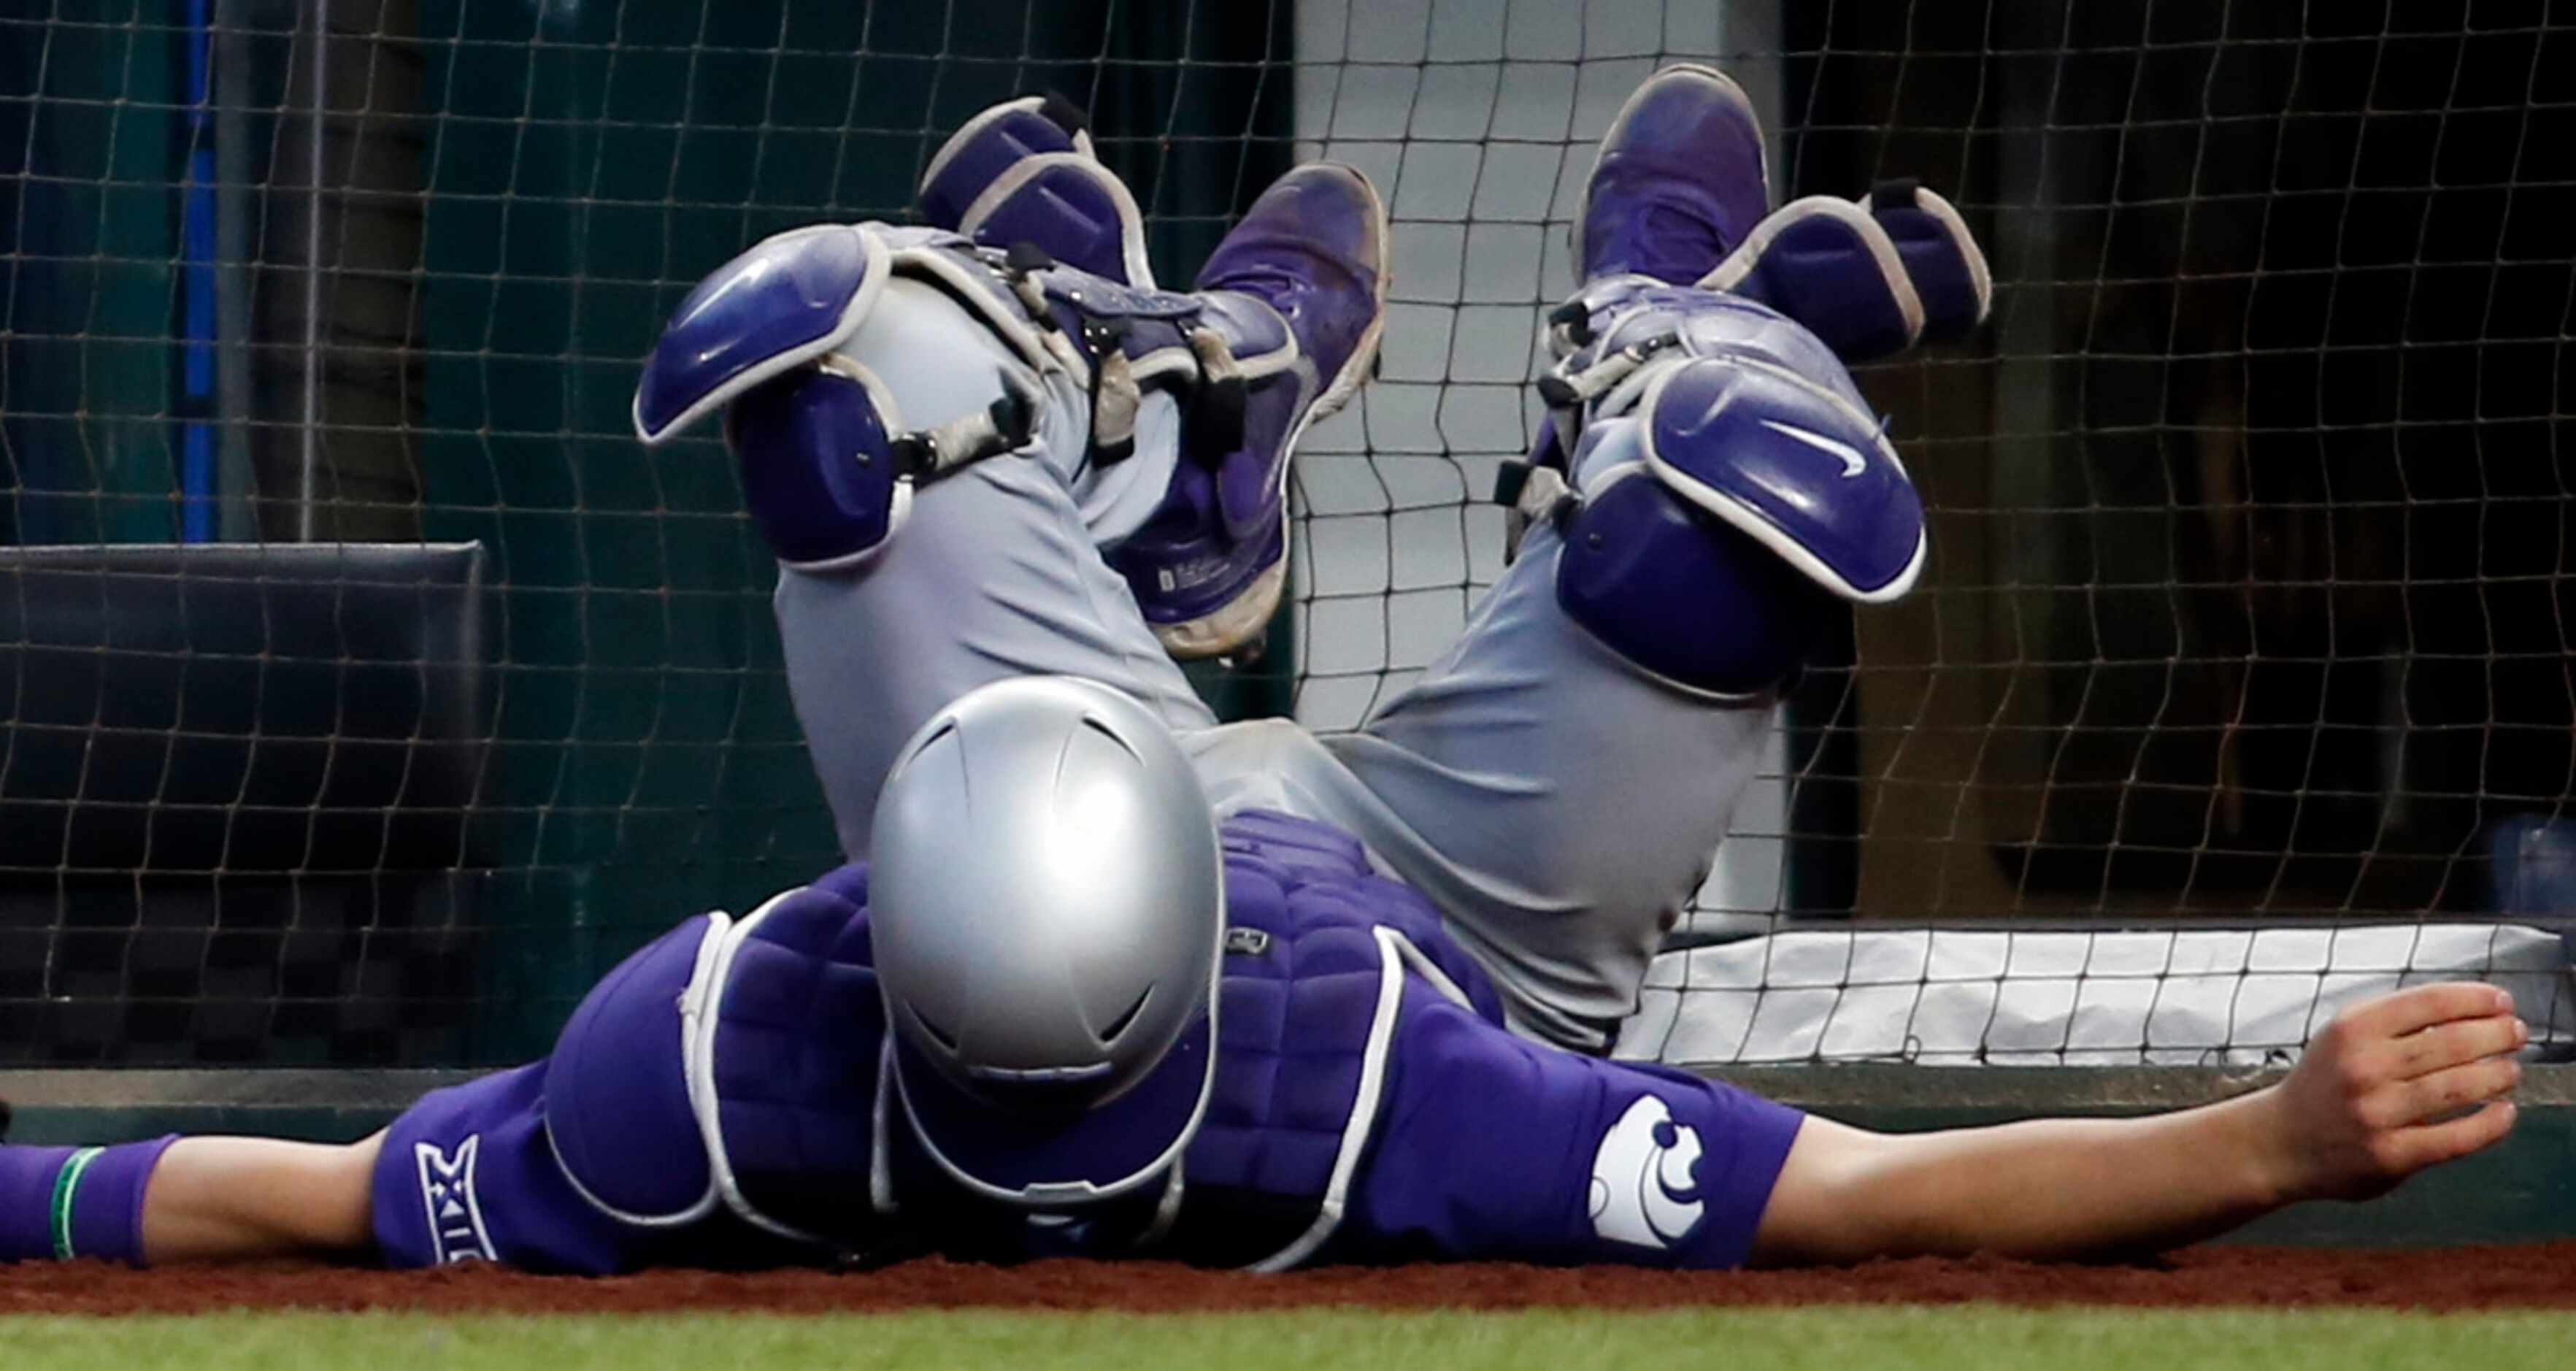 Kansas State catcher Raphael Pelletier (28) made a sliding attempt into the safety netting...